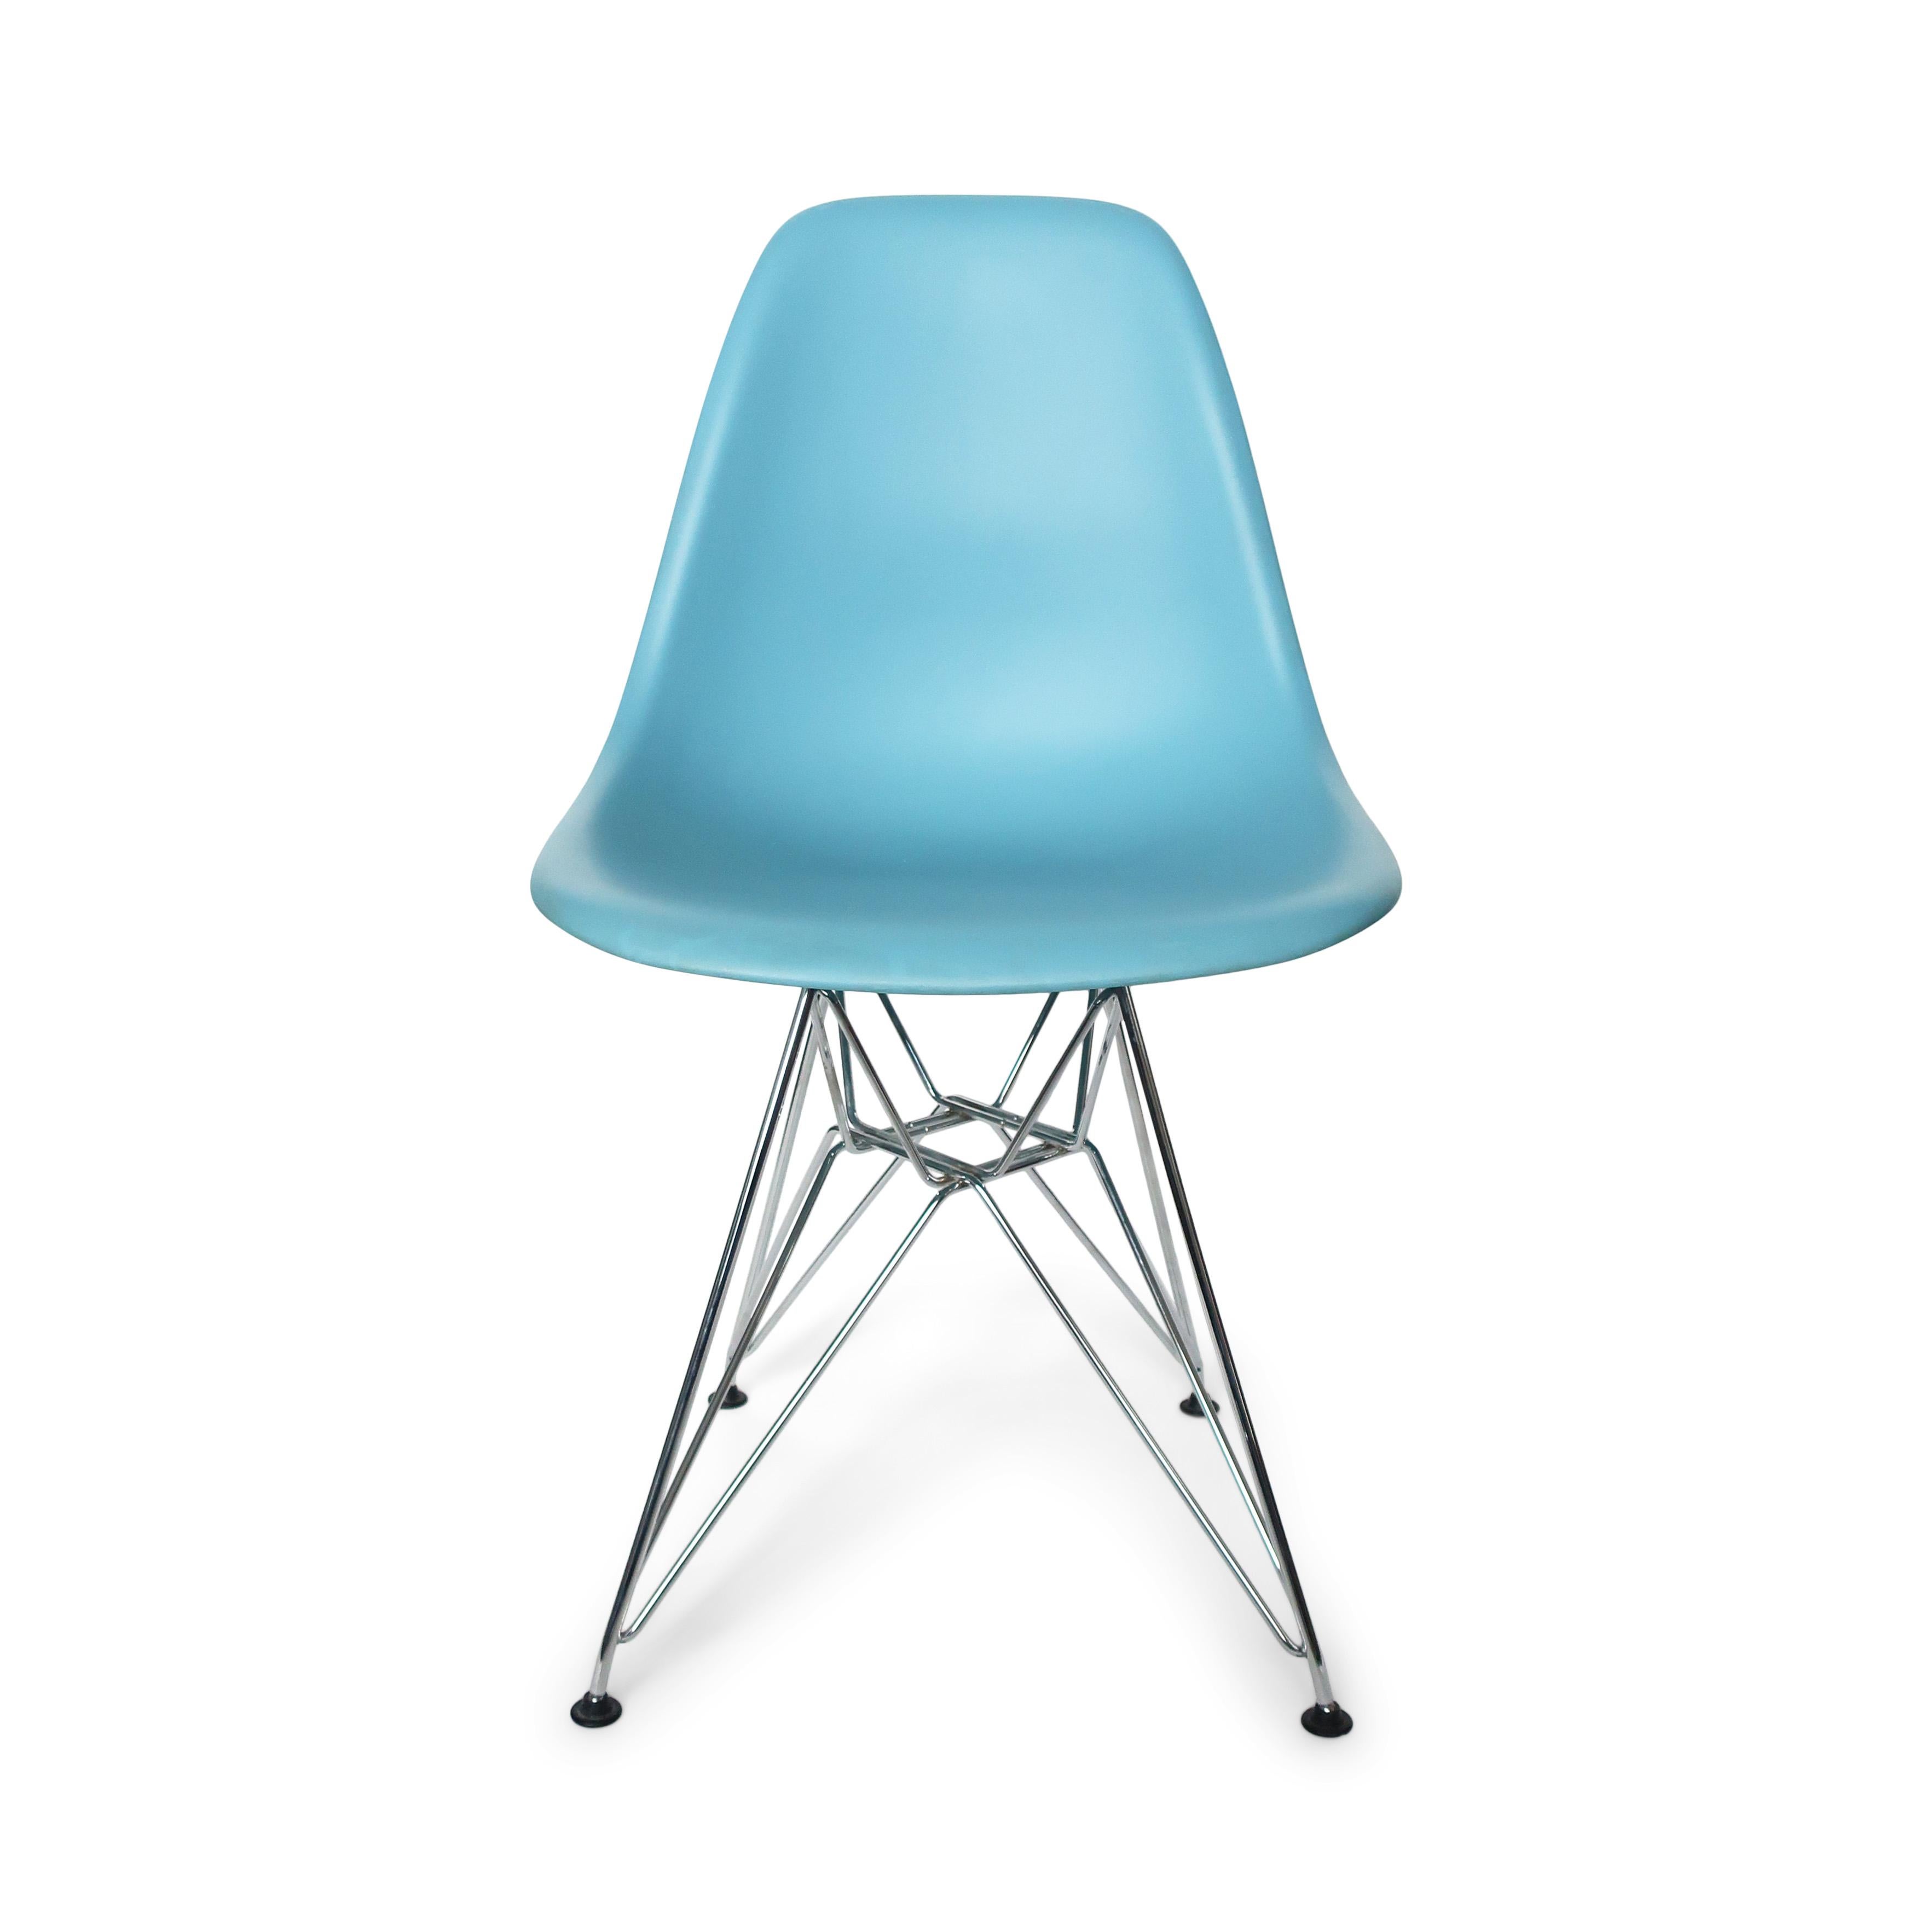 Pair of Blue Eames Dining Chairs with Eiffel Bases 1